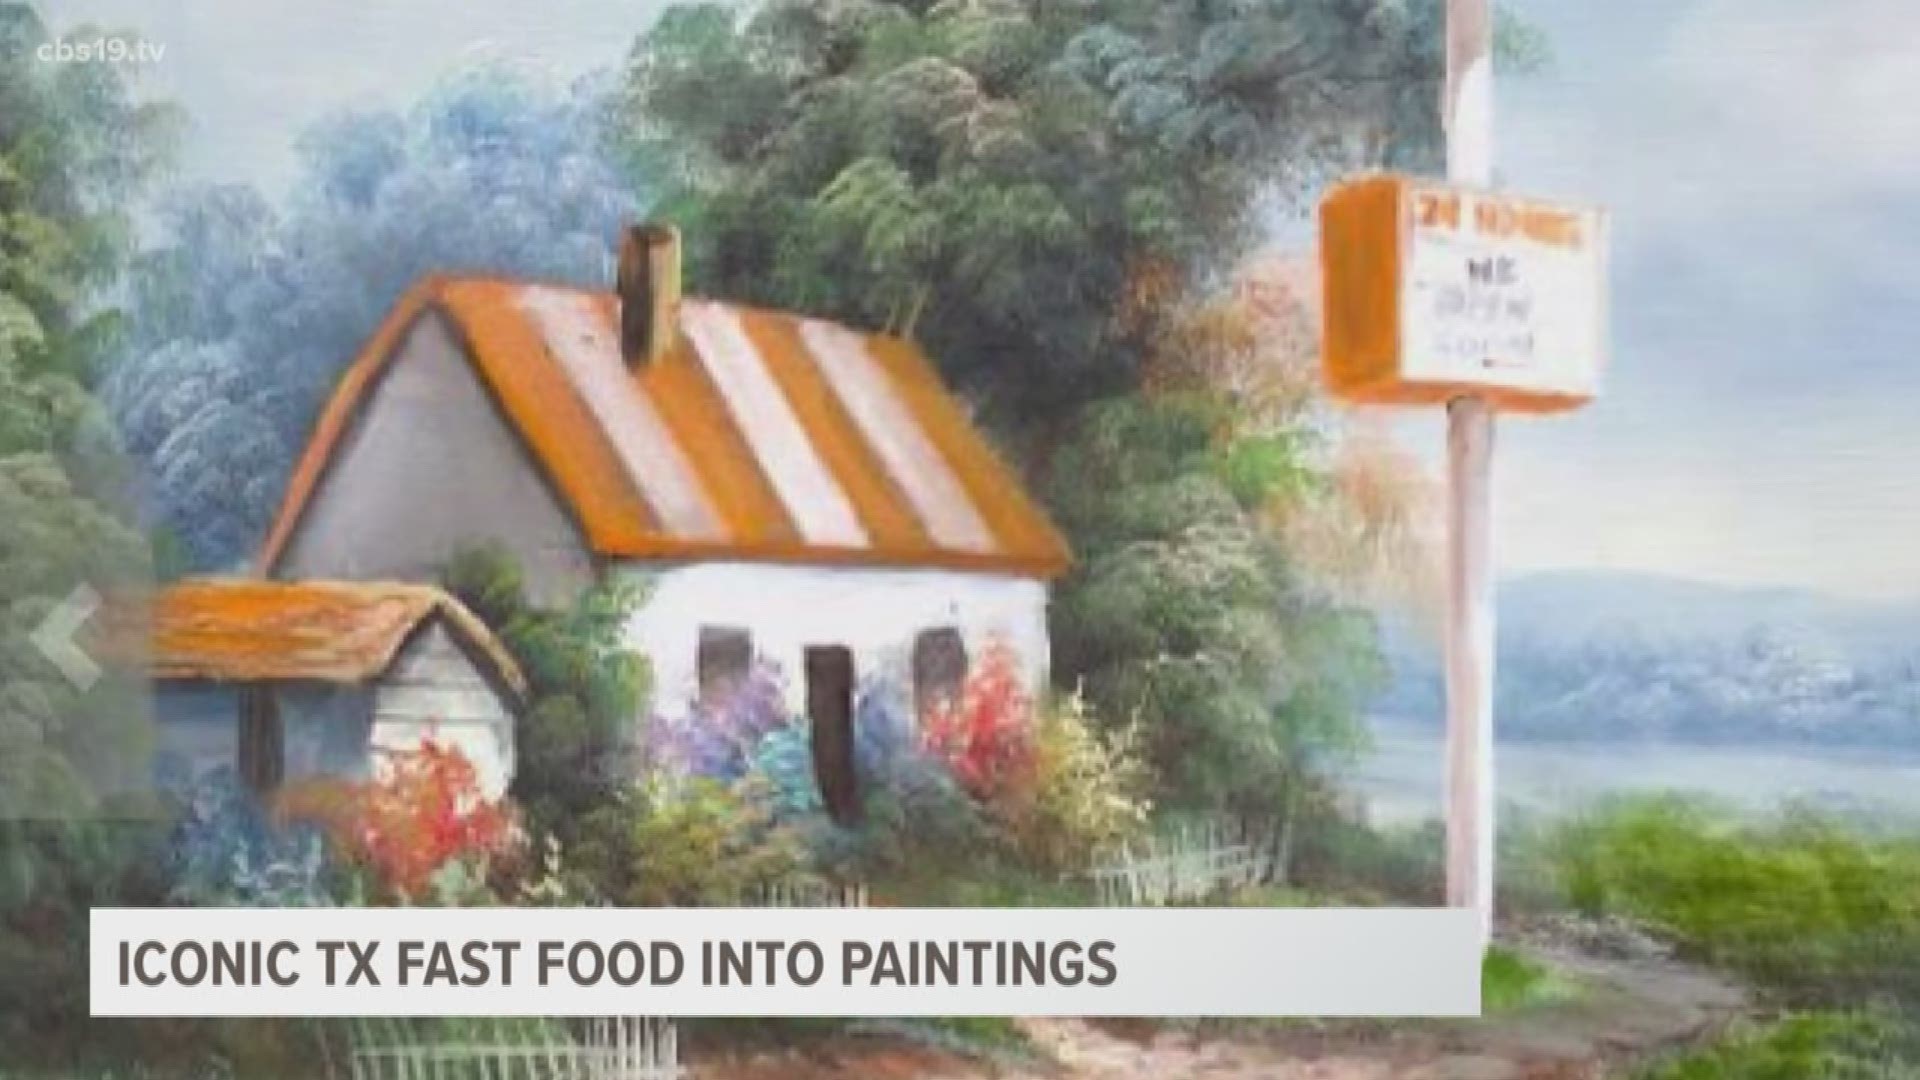 An artist in San Antonio is creating oil paintings featuring iconic Texas fast food joints.